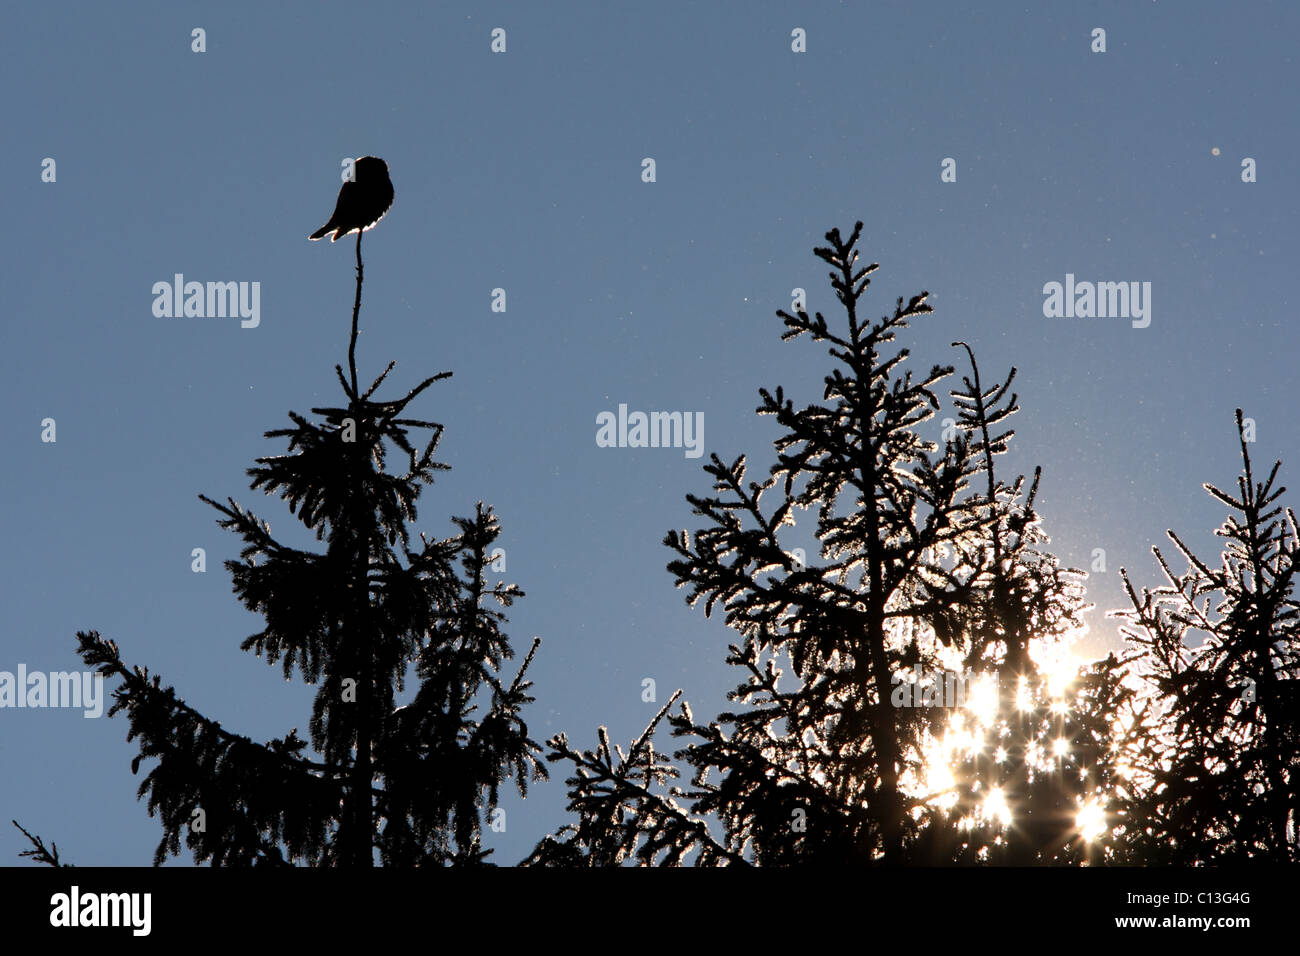 Silhouette of Wild Northern Hawk Owl (Surnia ulula) on tree top with sun shining behind the trees. Stock Photo